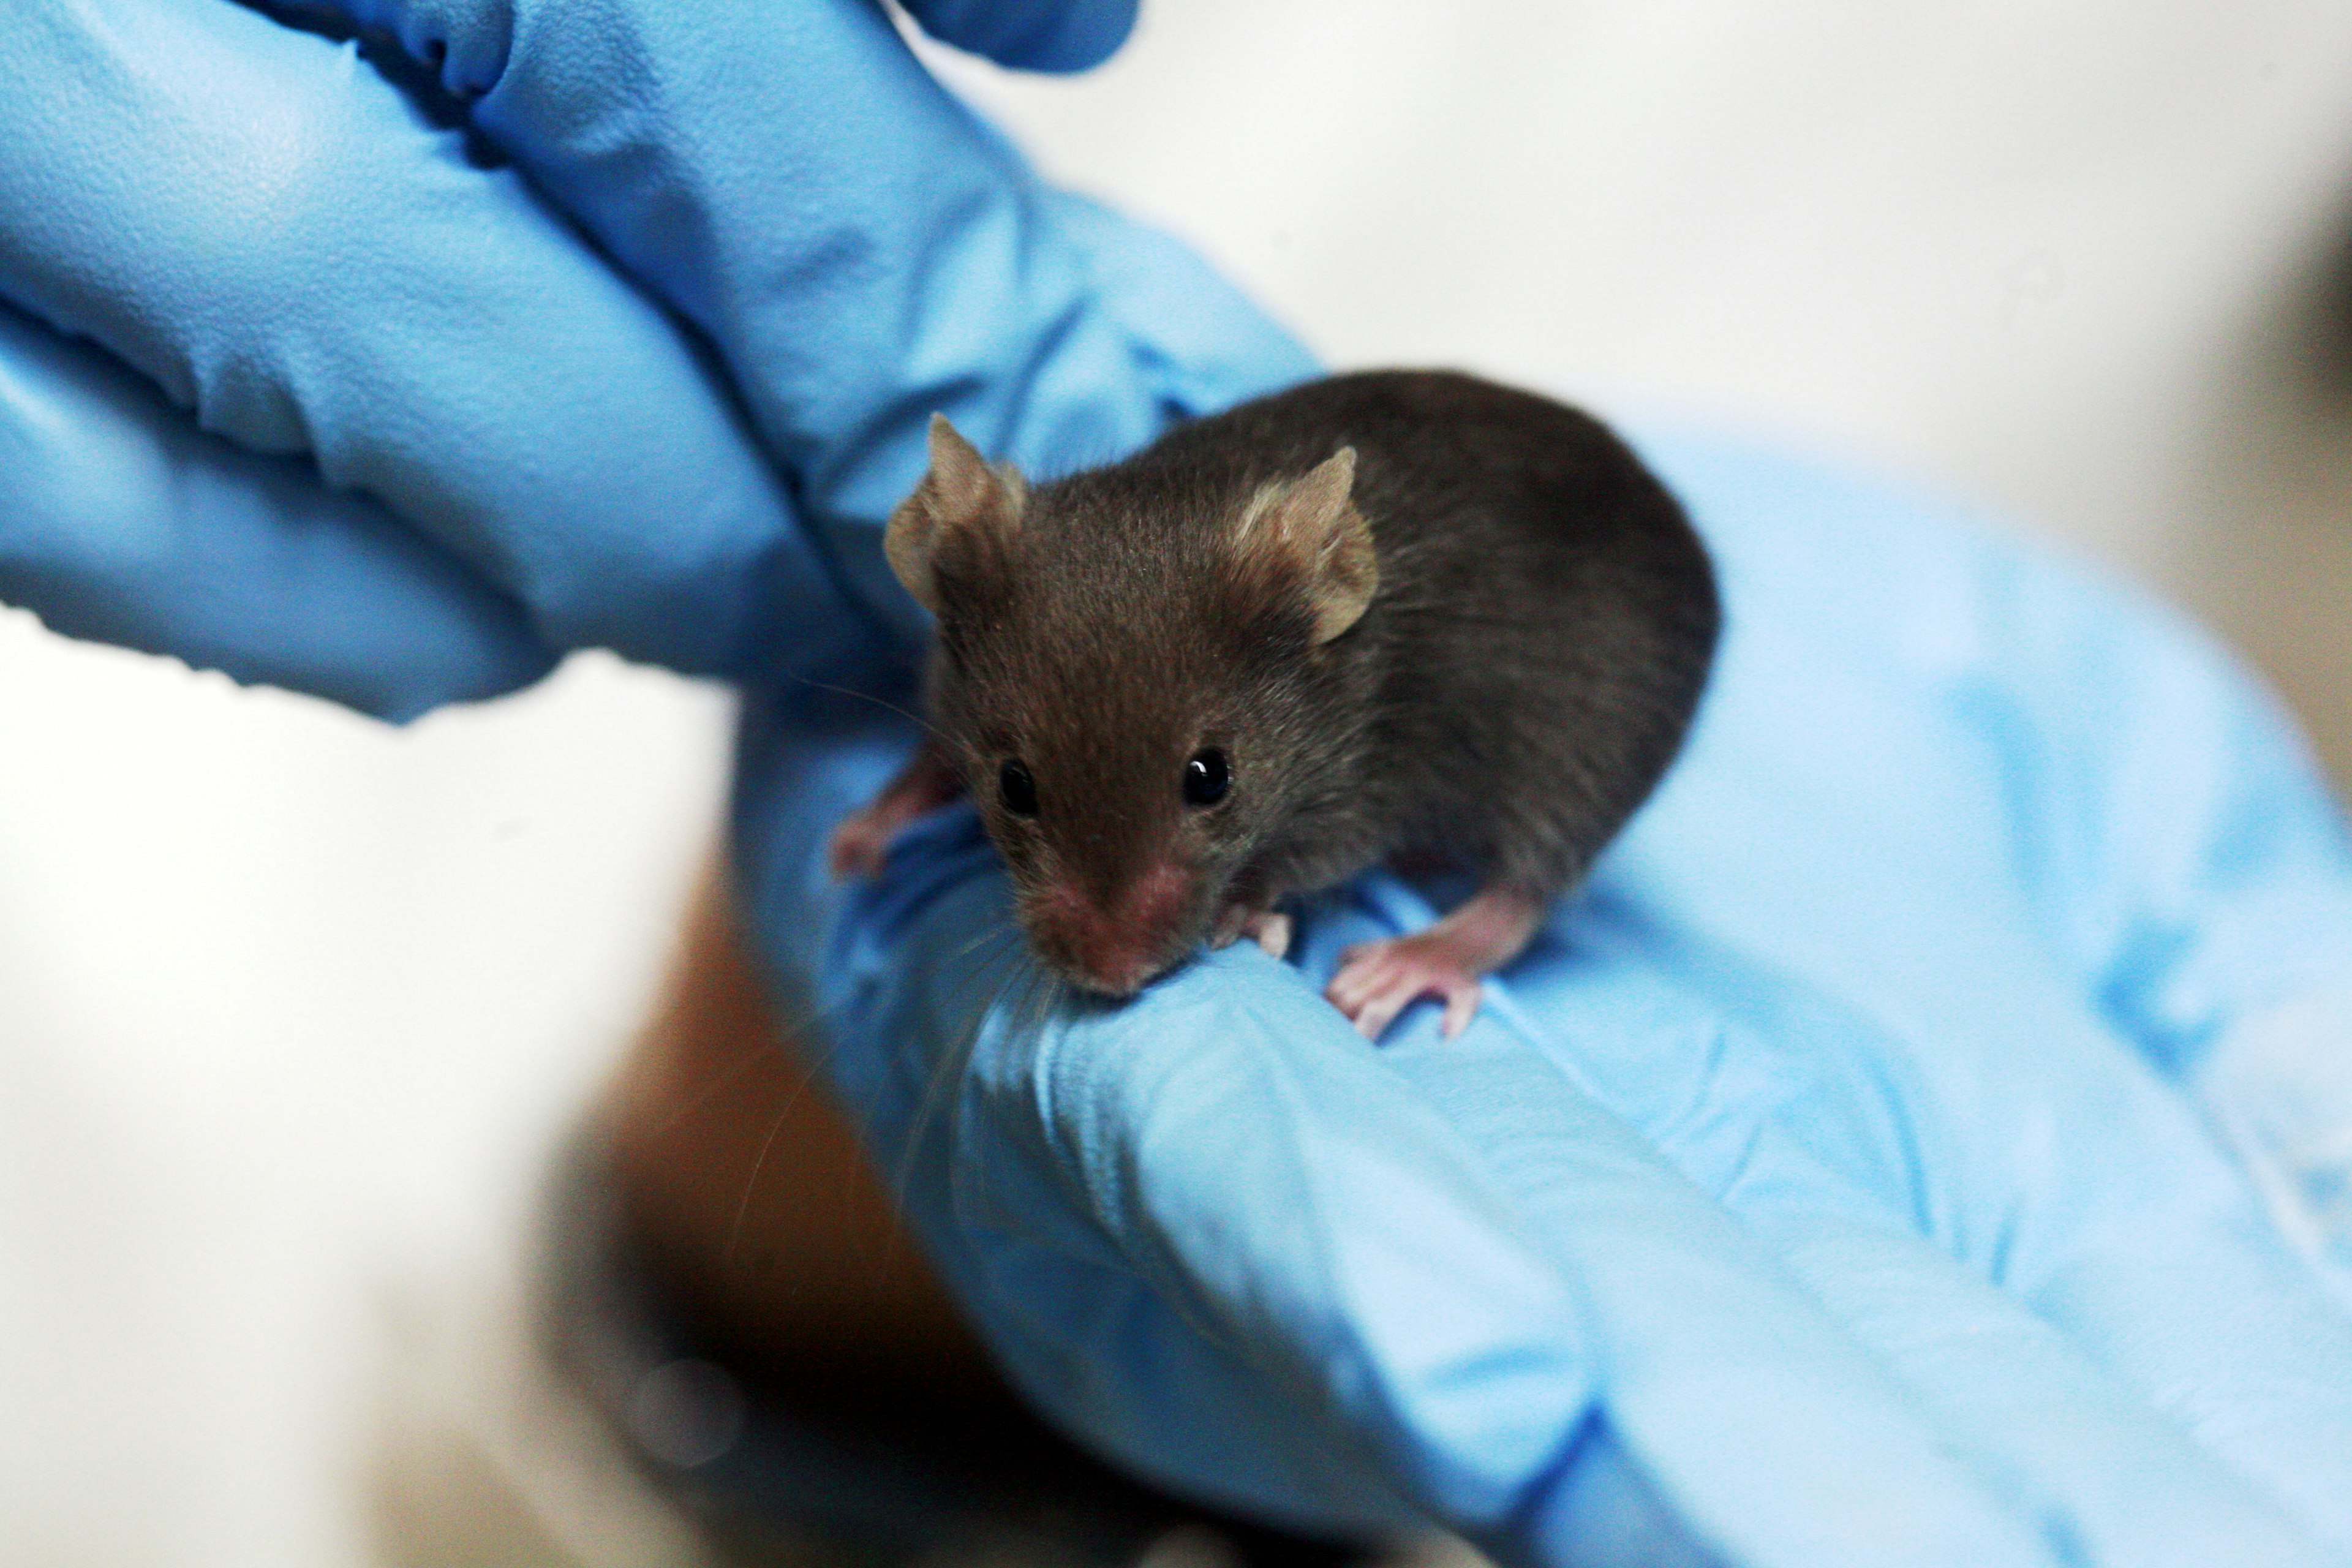 A small brown mouse held in the palm of a hand.